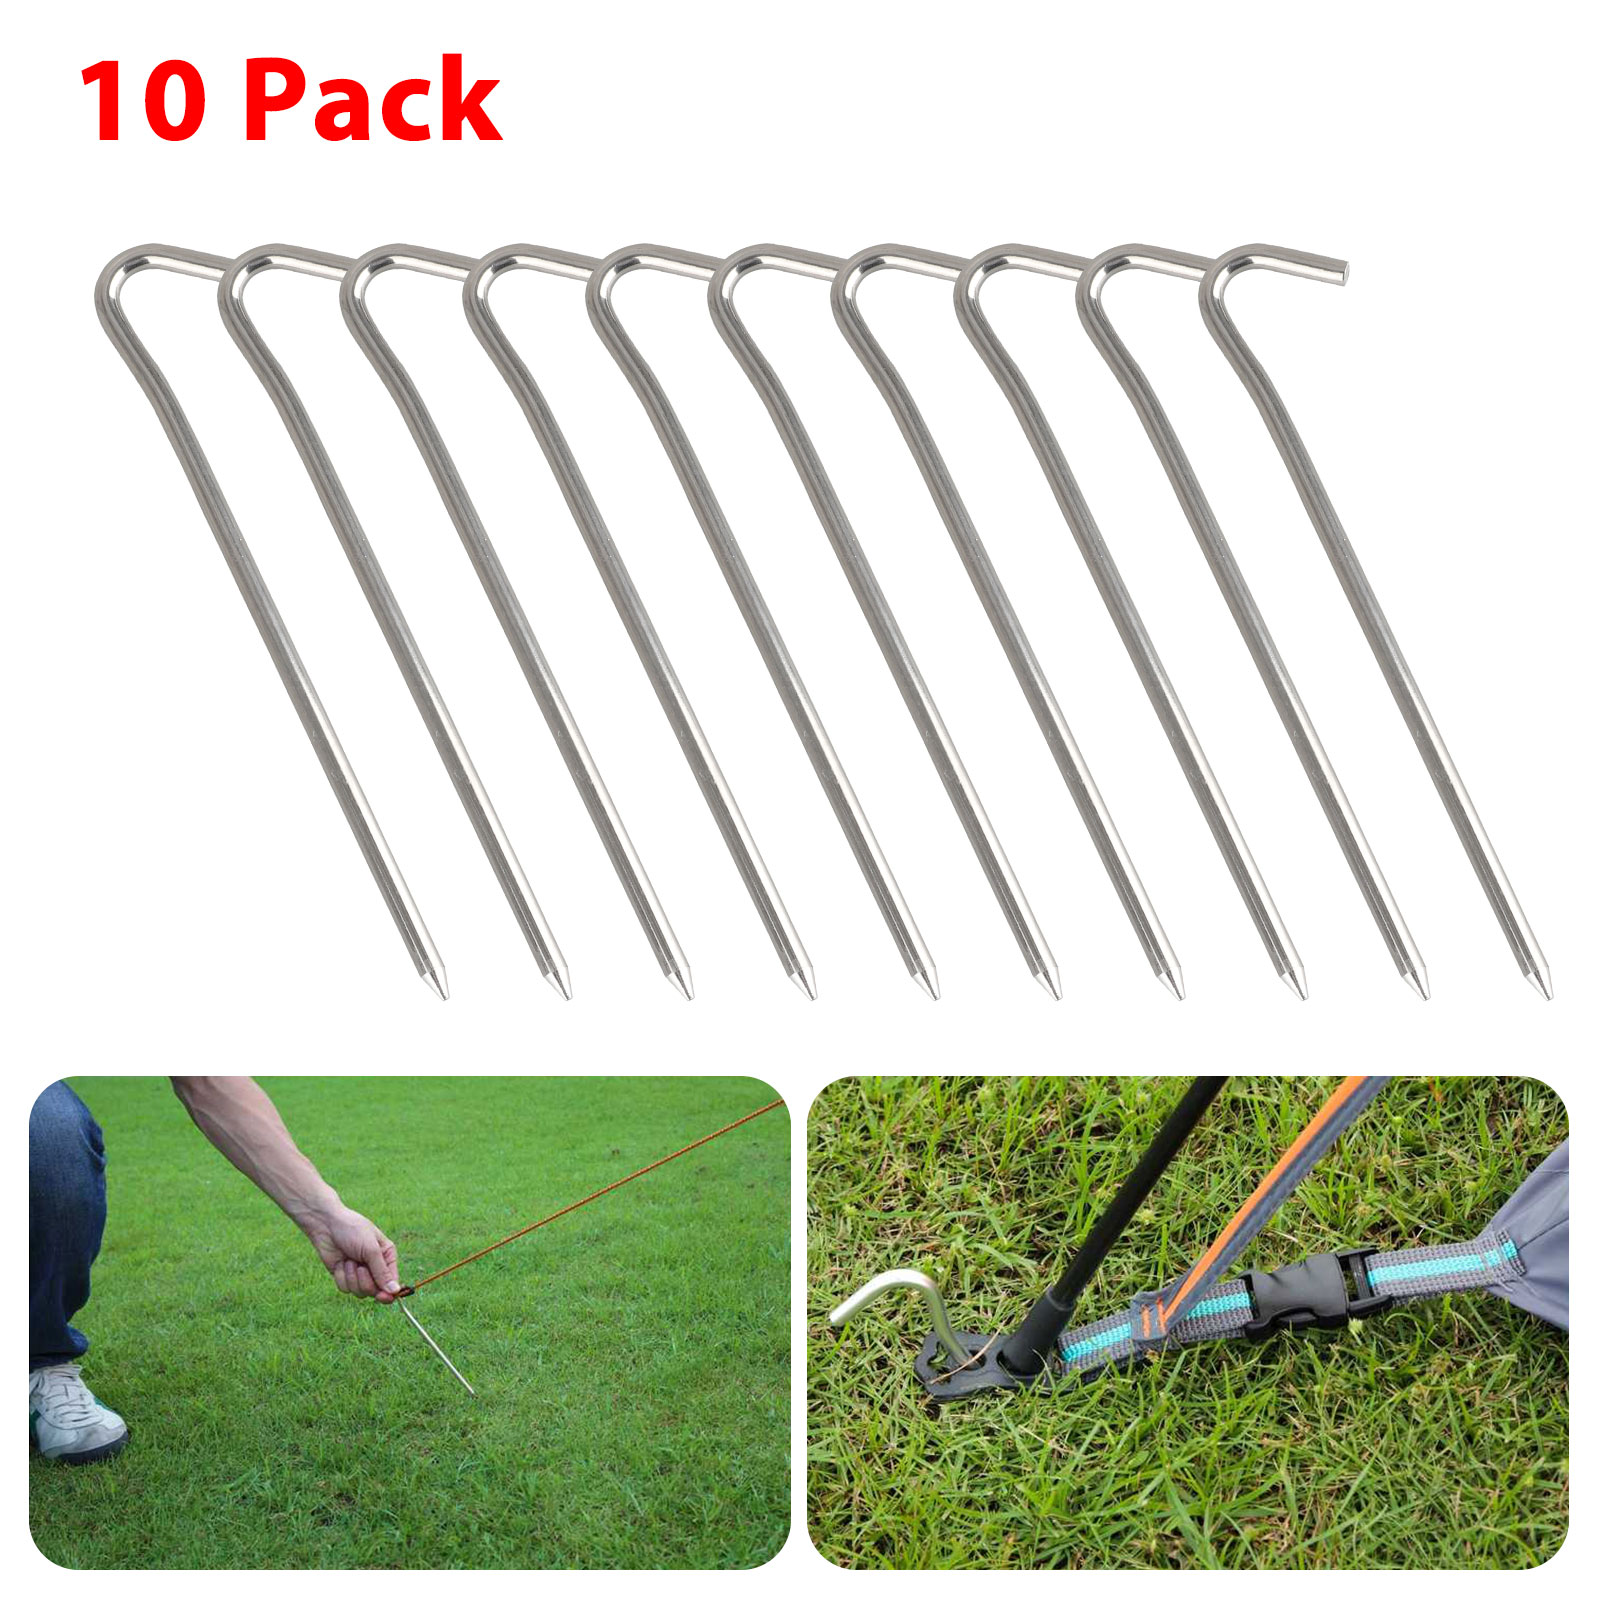 EEEkit Steel Tent Pegs, Garden Stakes, Heavy Duty Rust Free Camping Tent Stakes Aluminum Heavy Duty Camping Garden Canopy Stakes Pegs, Tent Stakes for Outdoor Camping, 10pcs - image 1 of 9